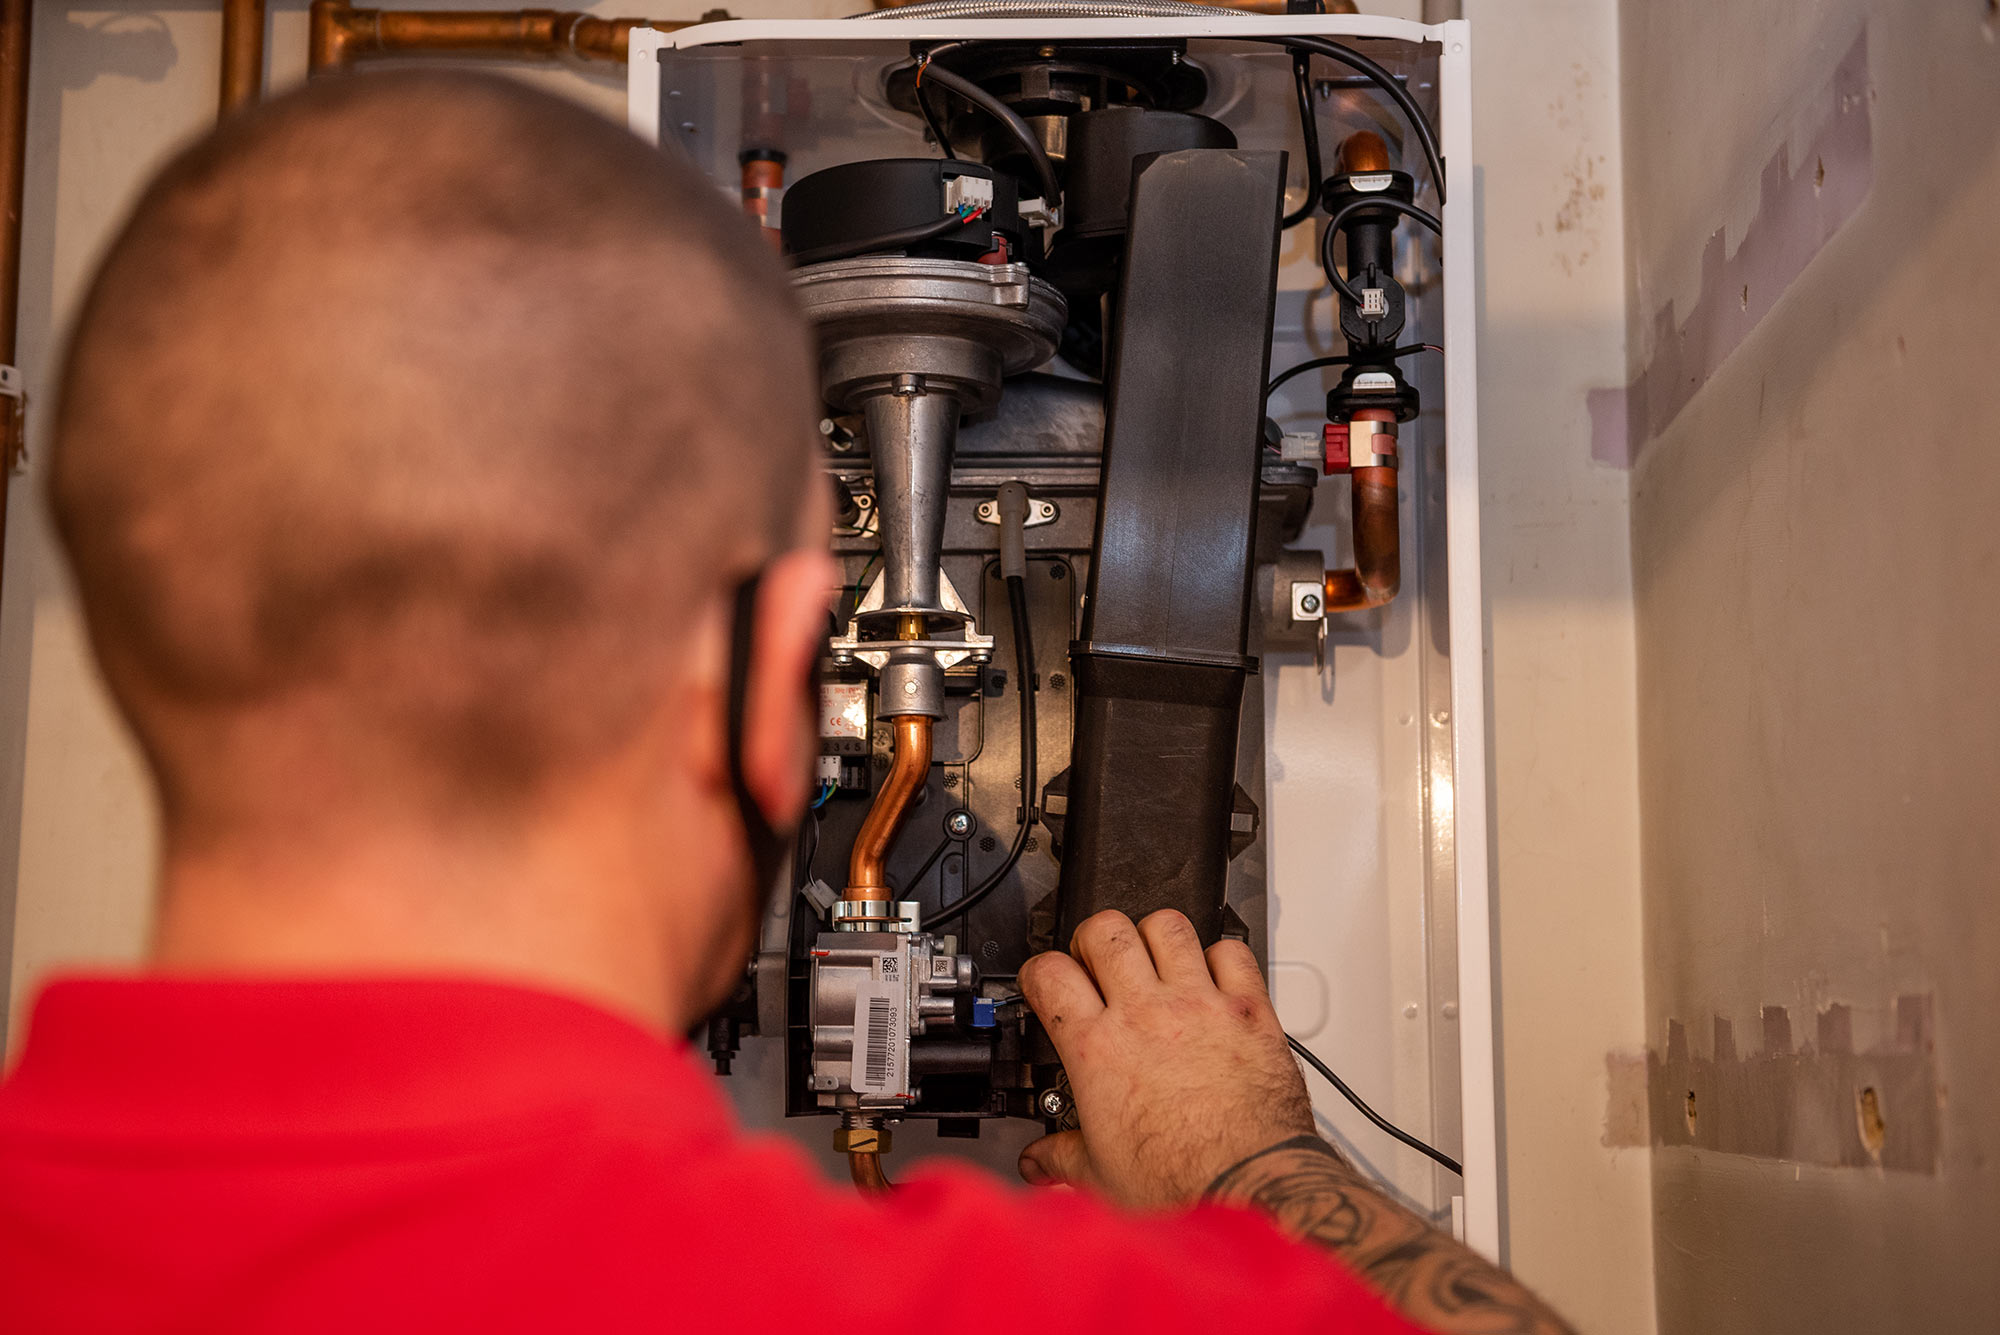 My boiler is making strange noises – Do I need to call an engineer?